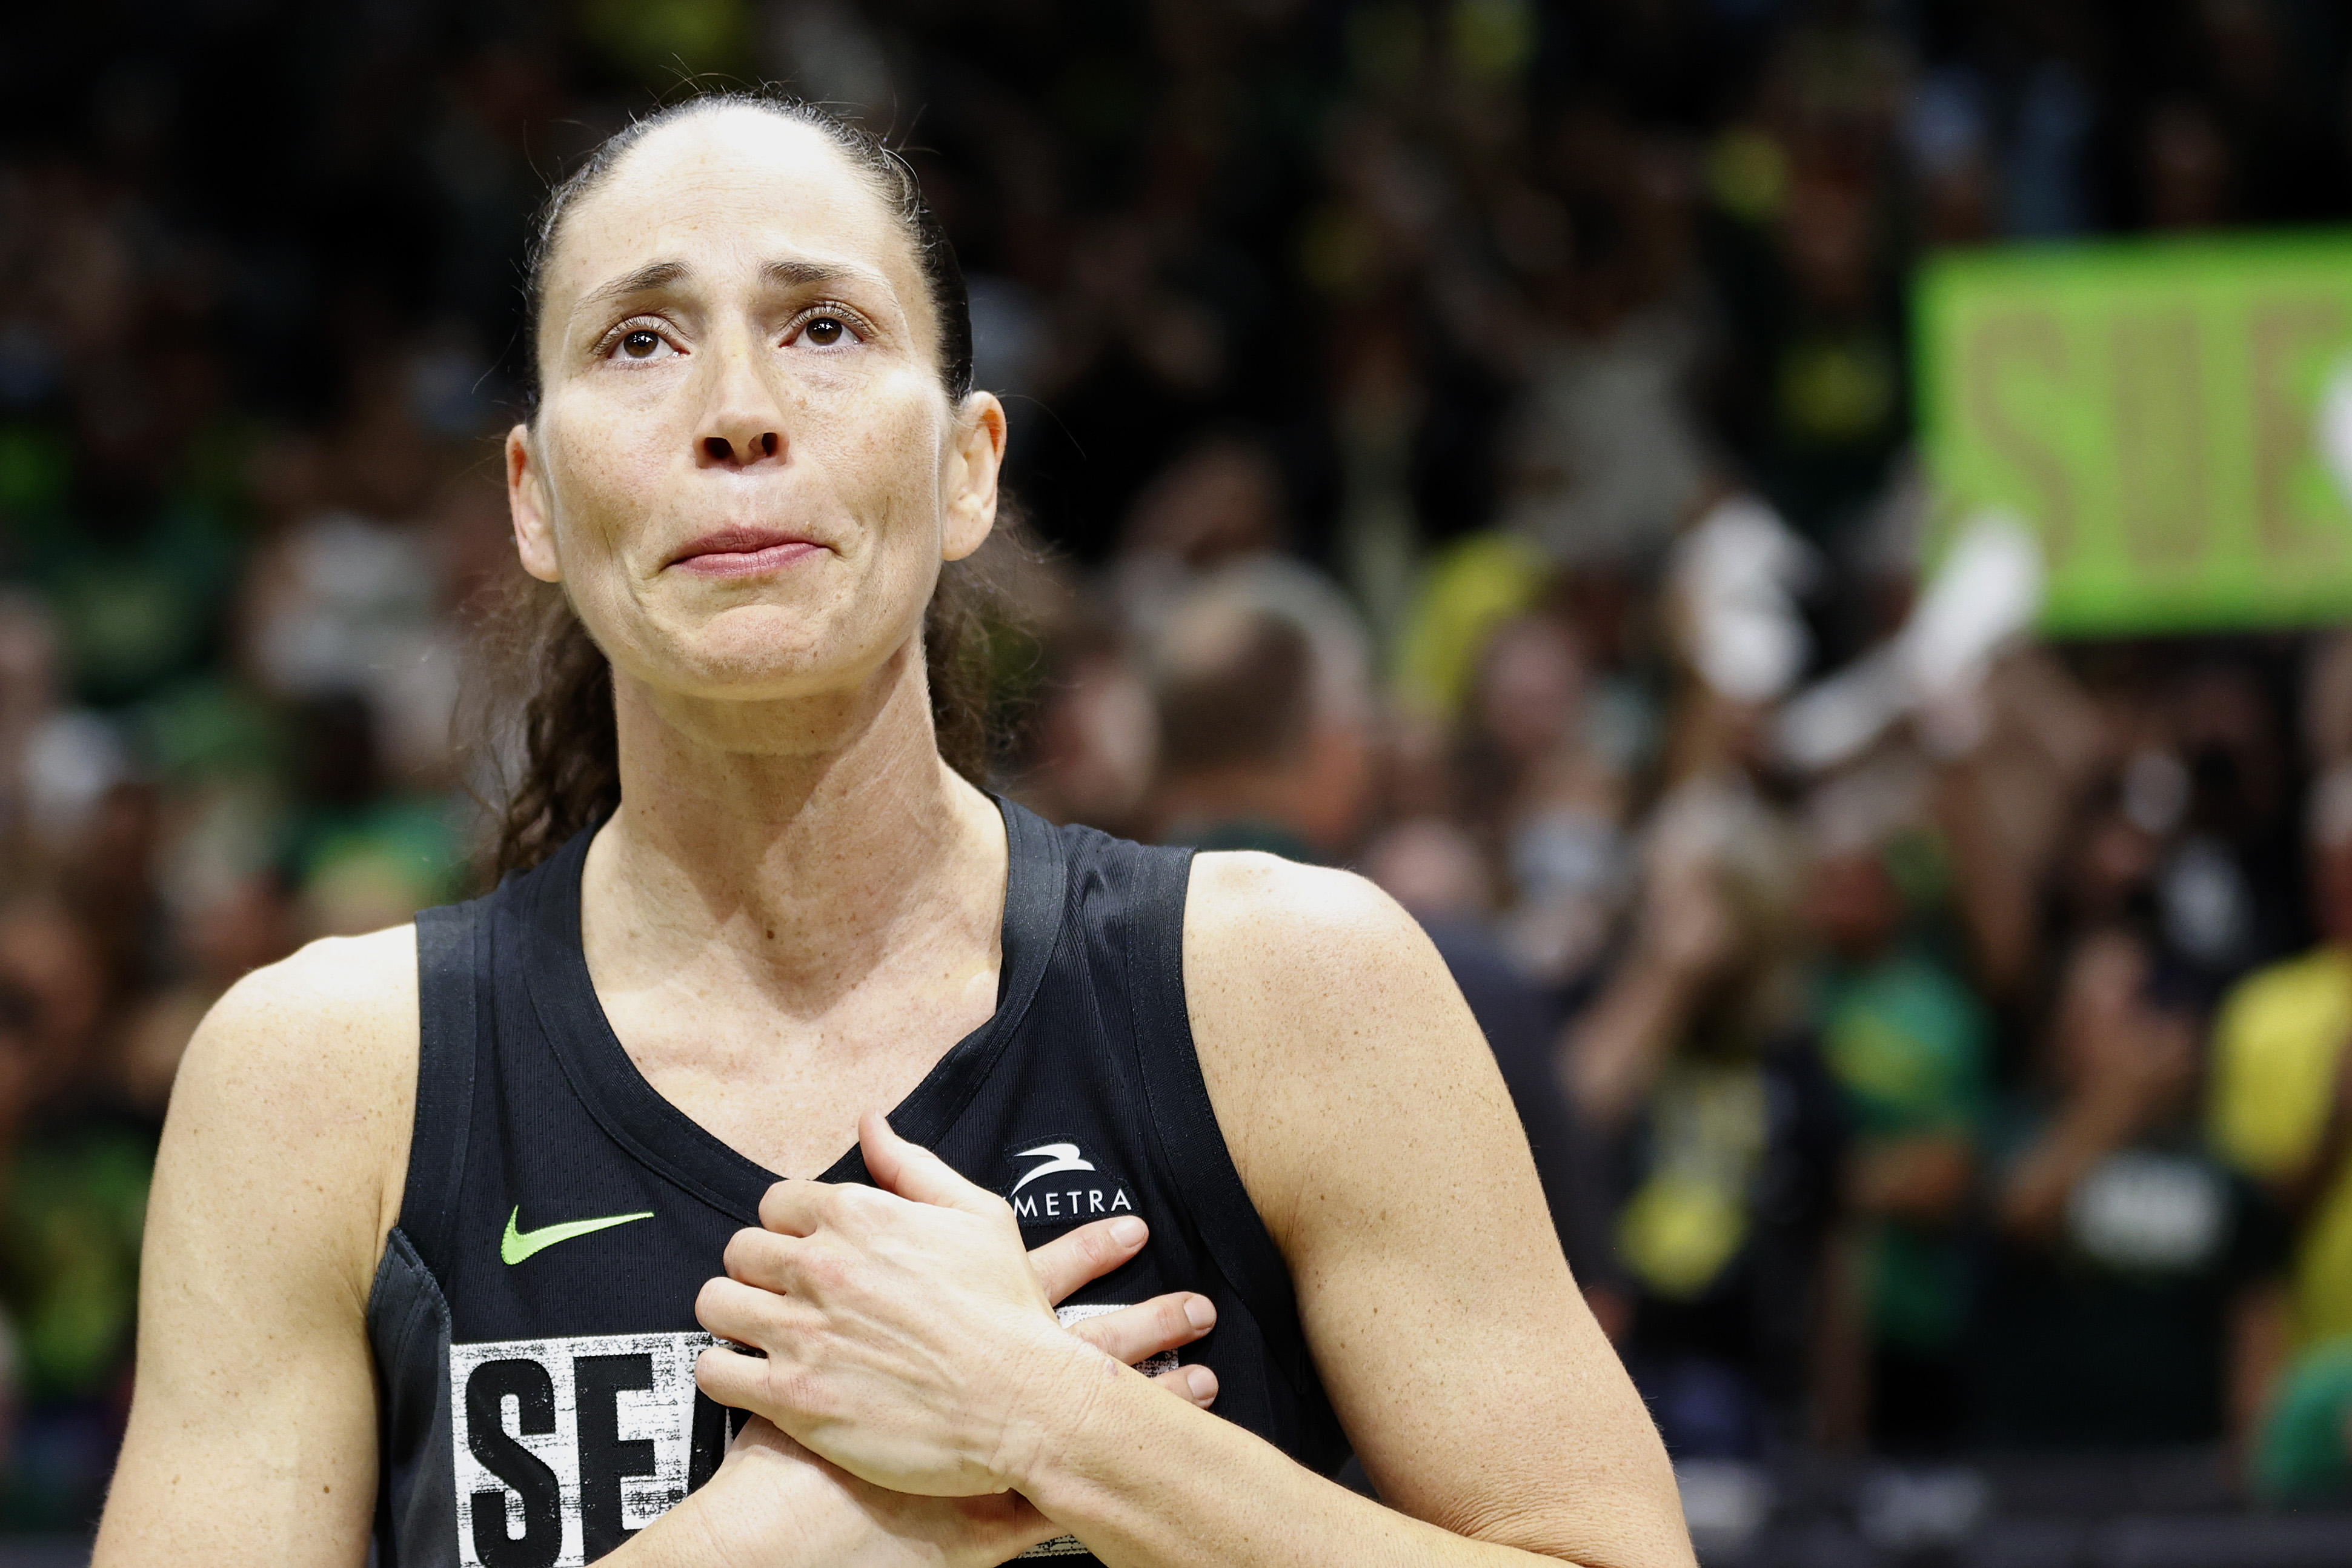 The Sporting News on X: Sue Bird's jersey is officially retired